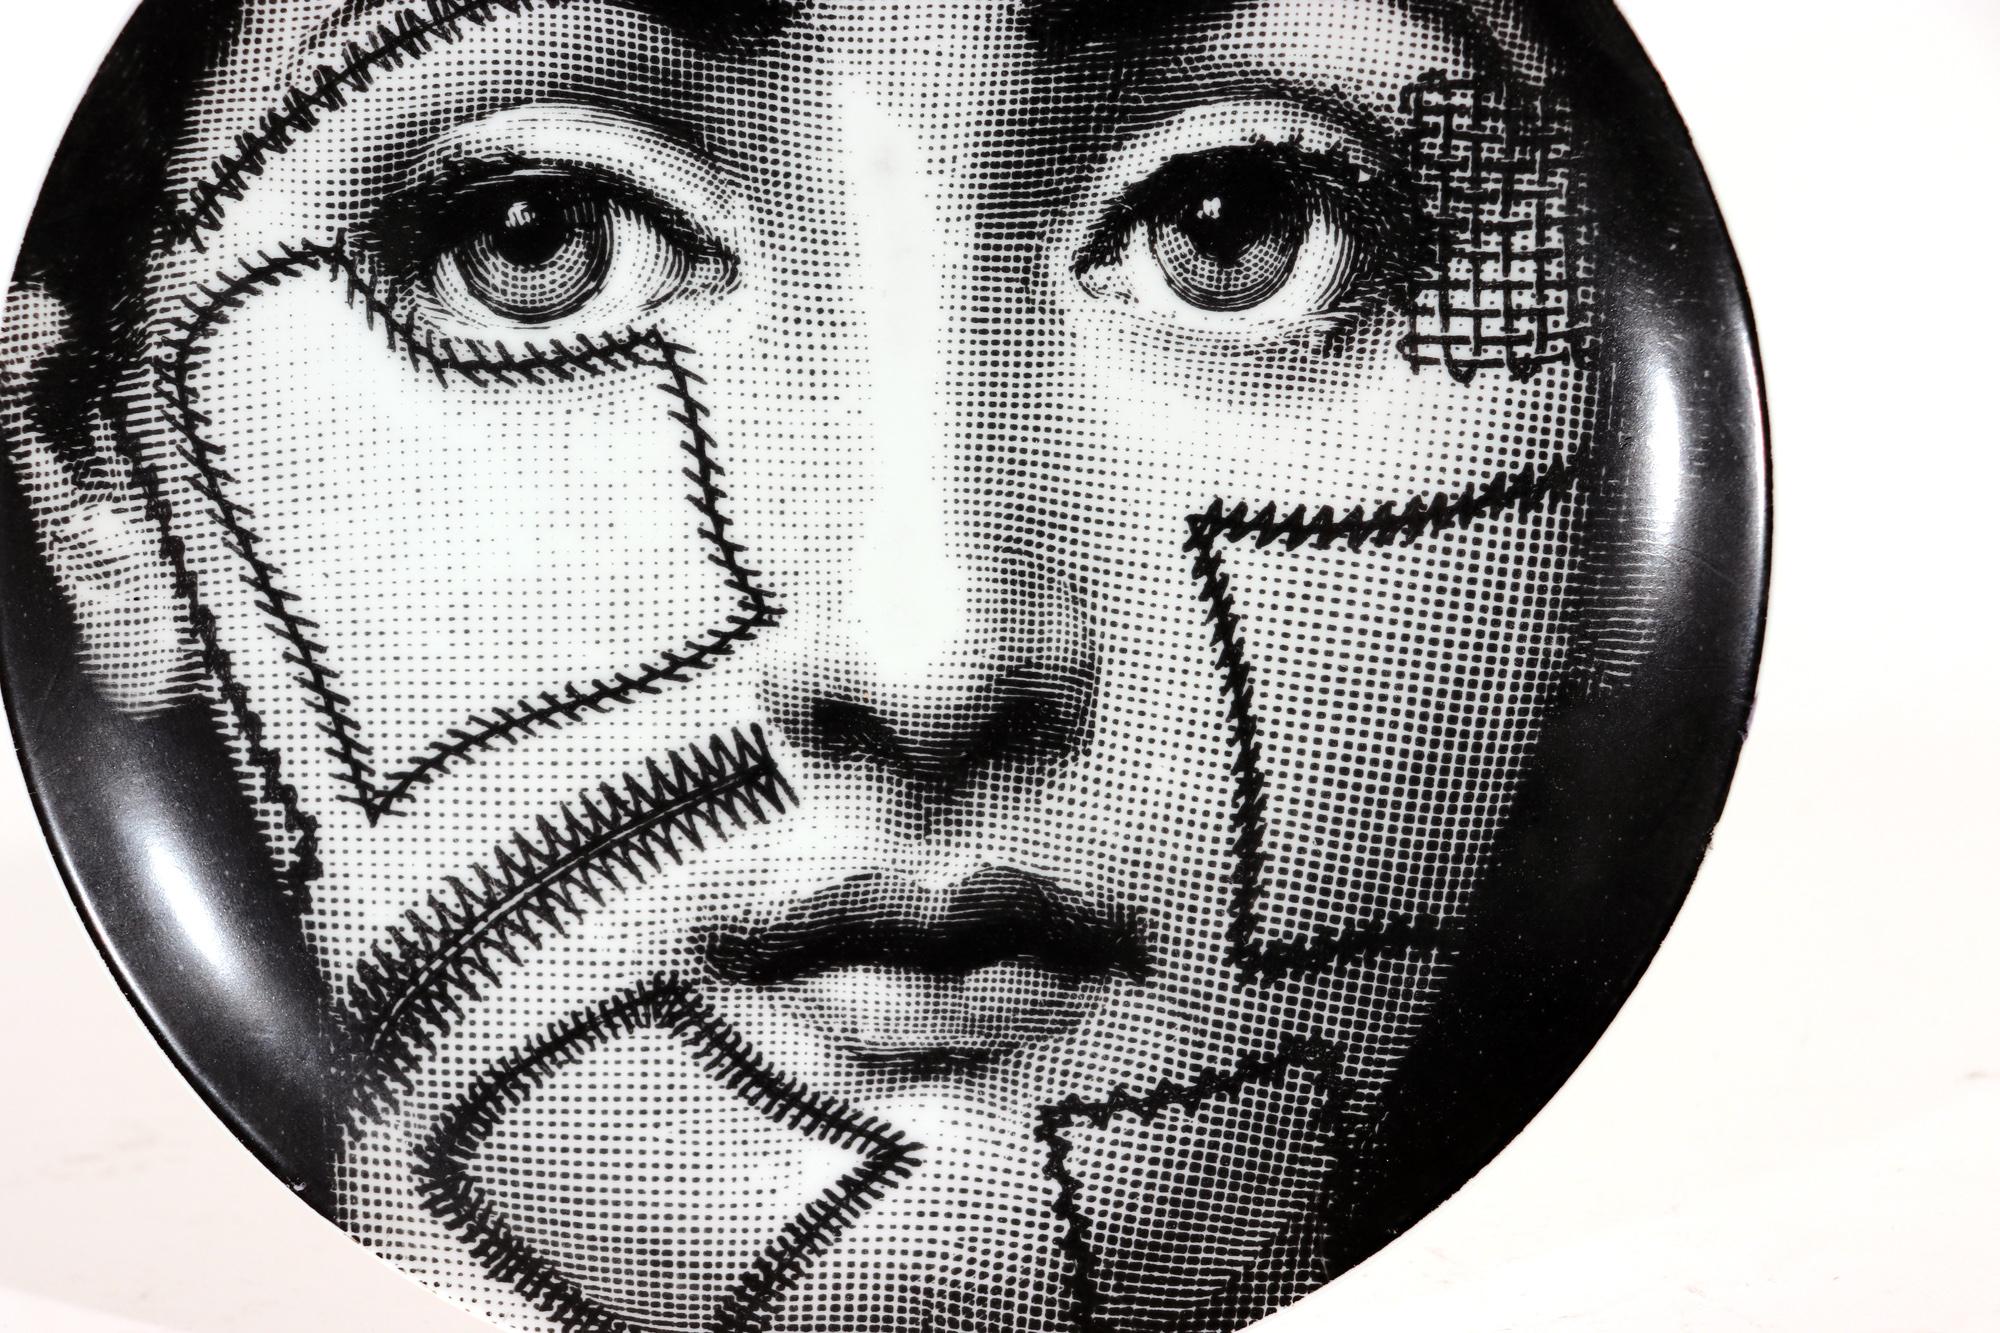 Vintage Piero Fornasetti Themes & variation plate, #127
1970s,

The Piero Fornasetti porcelain plate in the Themes & Variation pattern depicts a surreal depiction of a woman's face as a stitched soccer ball, The face is that of Lina Cavalieri,